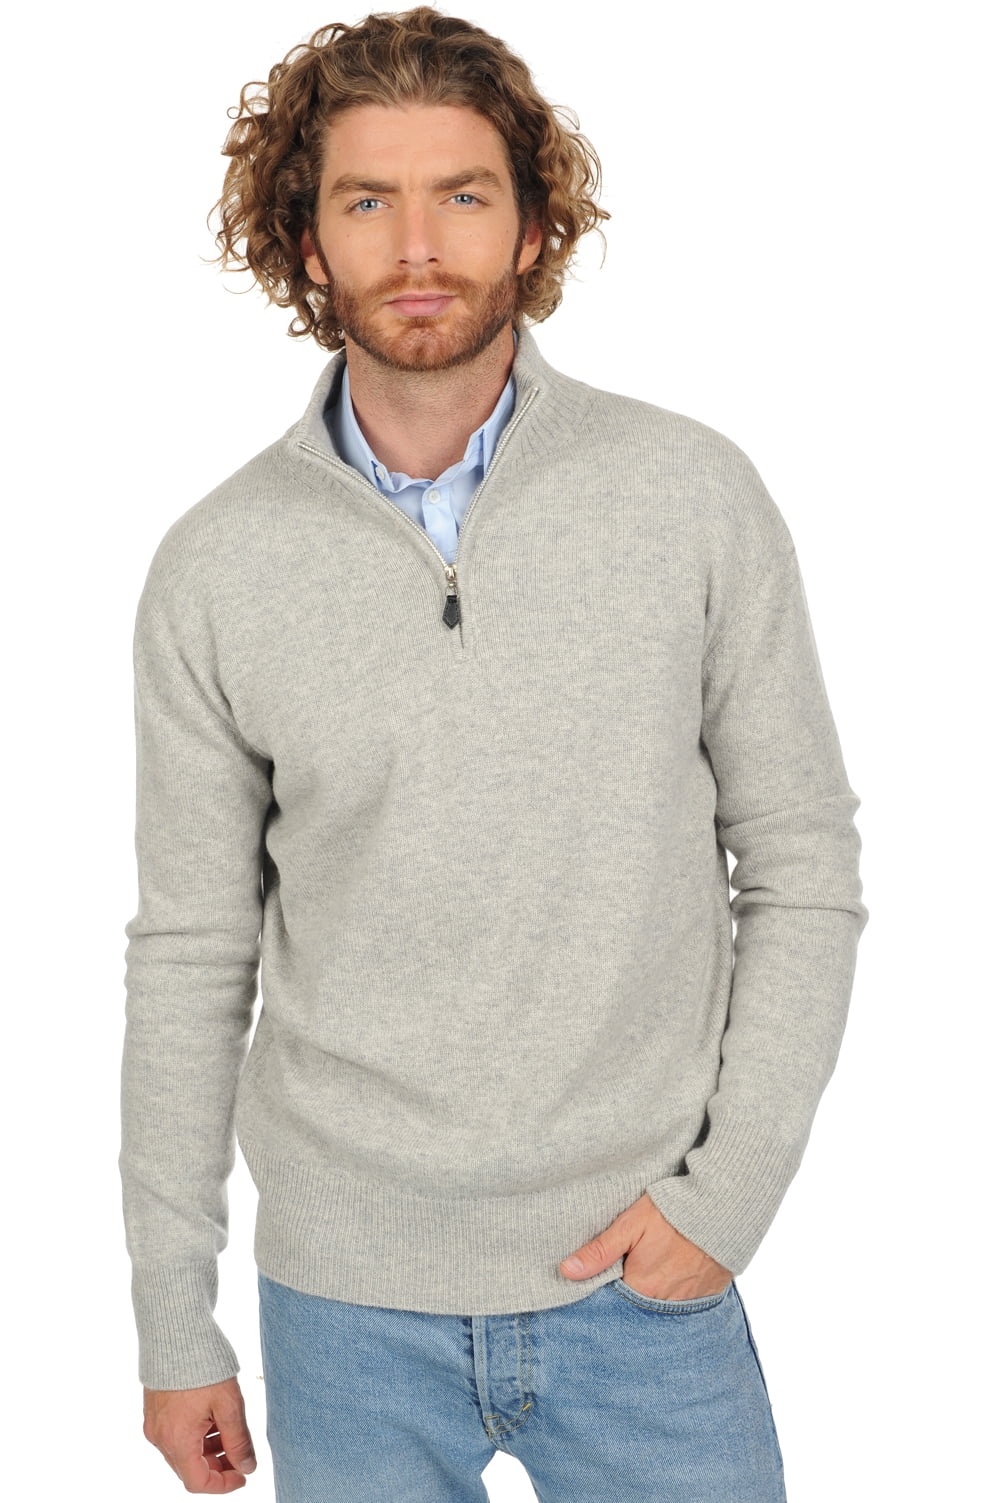 Cashmere men polo style sweaters donovan flanelle chine l